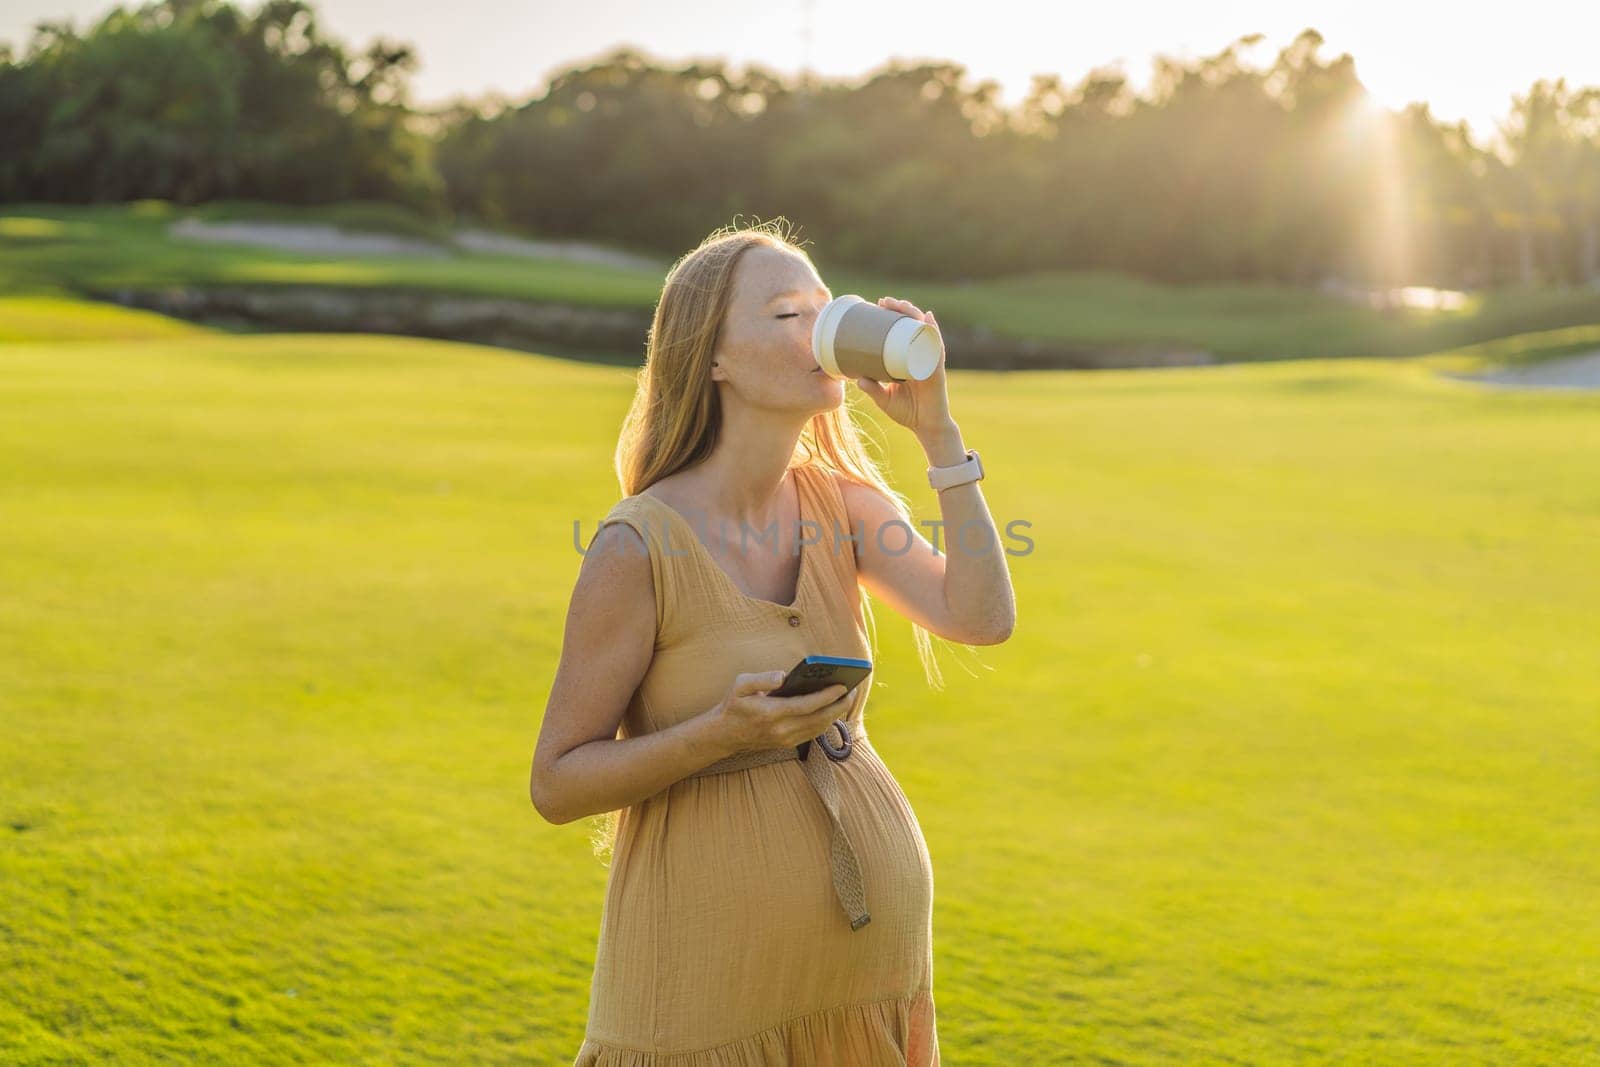 pregnant woman enjoys a cup of coffee outdoors, blending the simple pleasures of nature with the comforting warmth of a beverage during her pregnancy by galitskaya